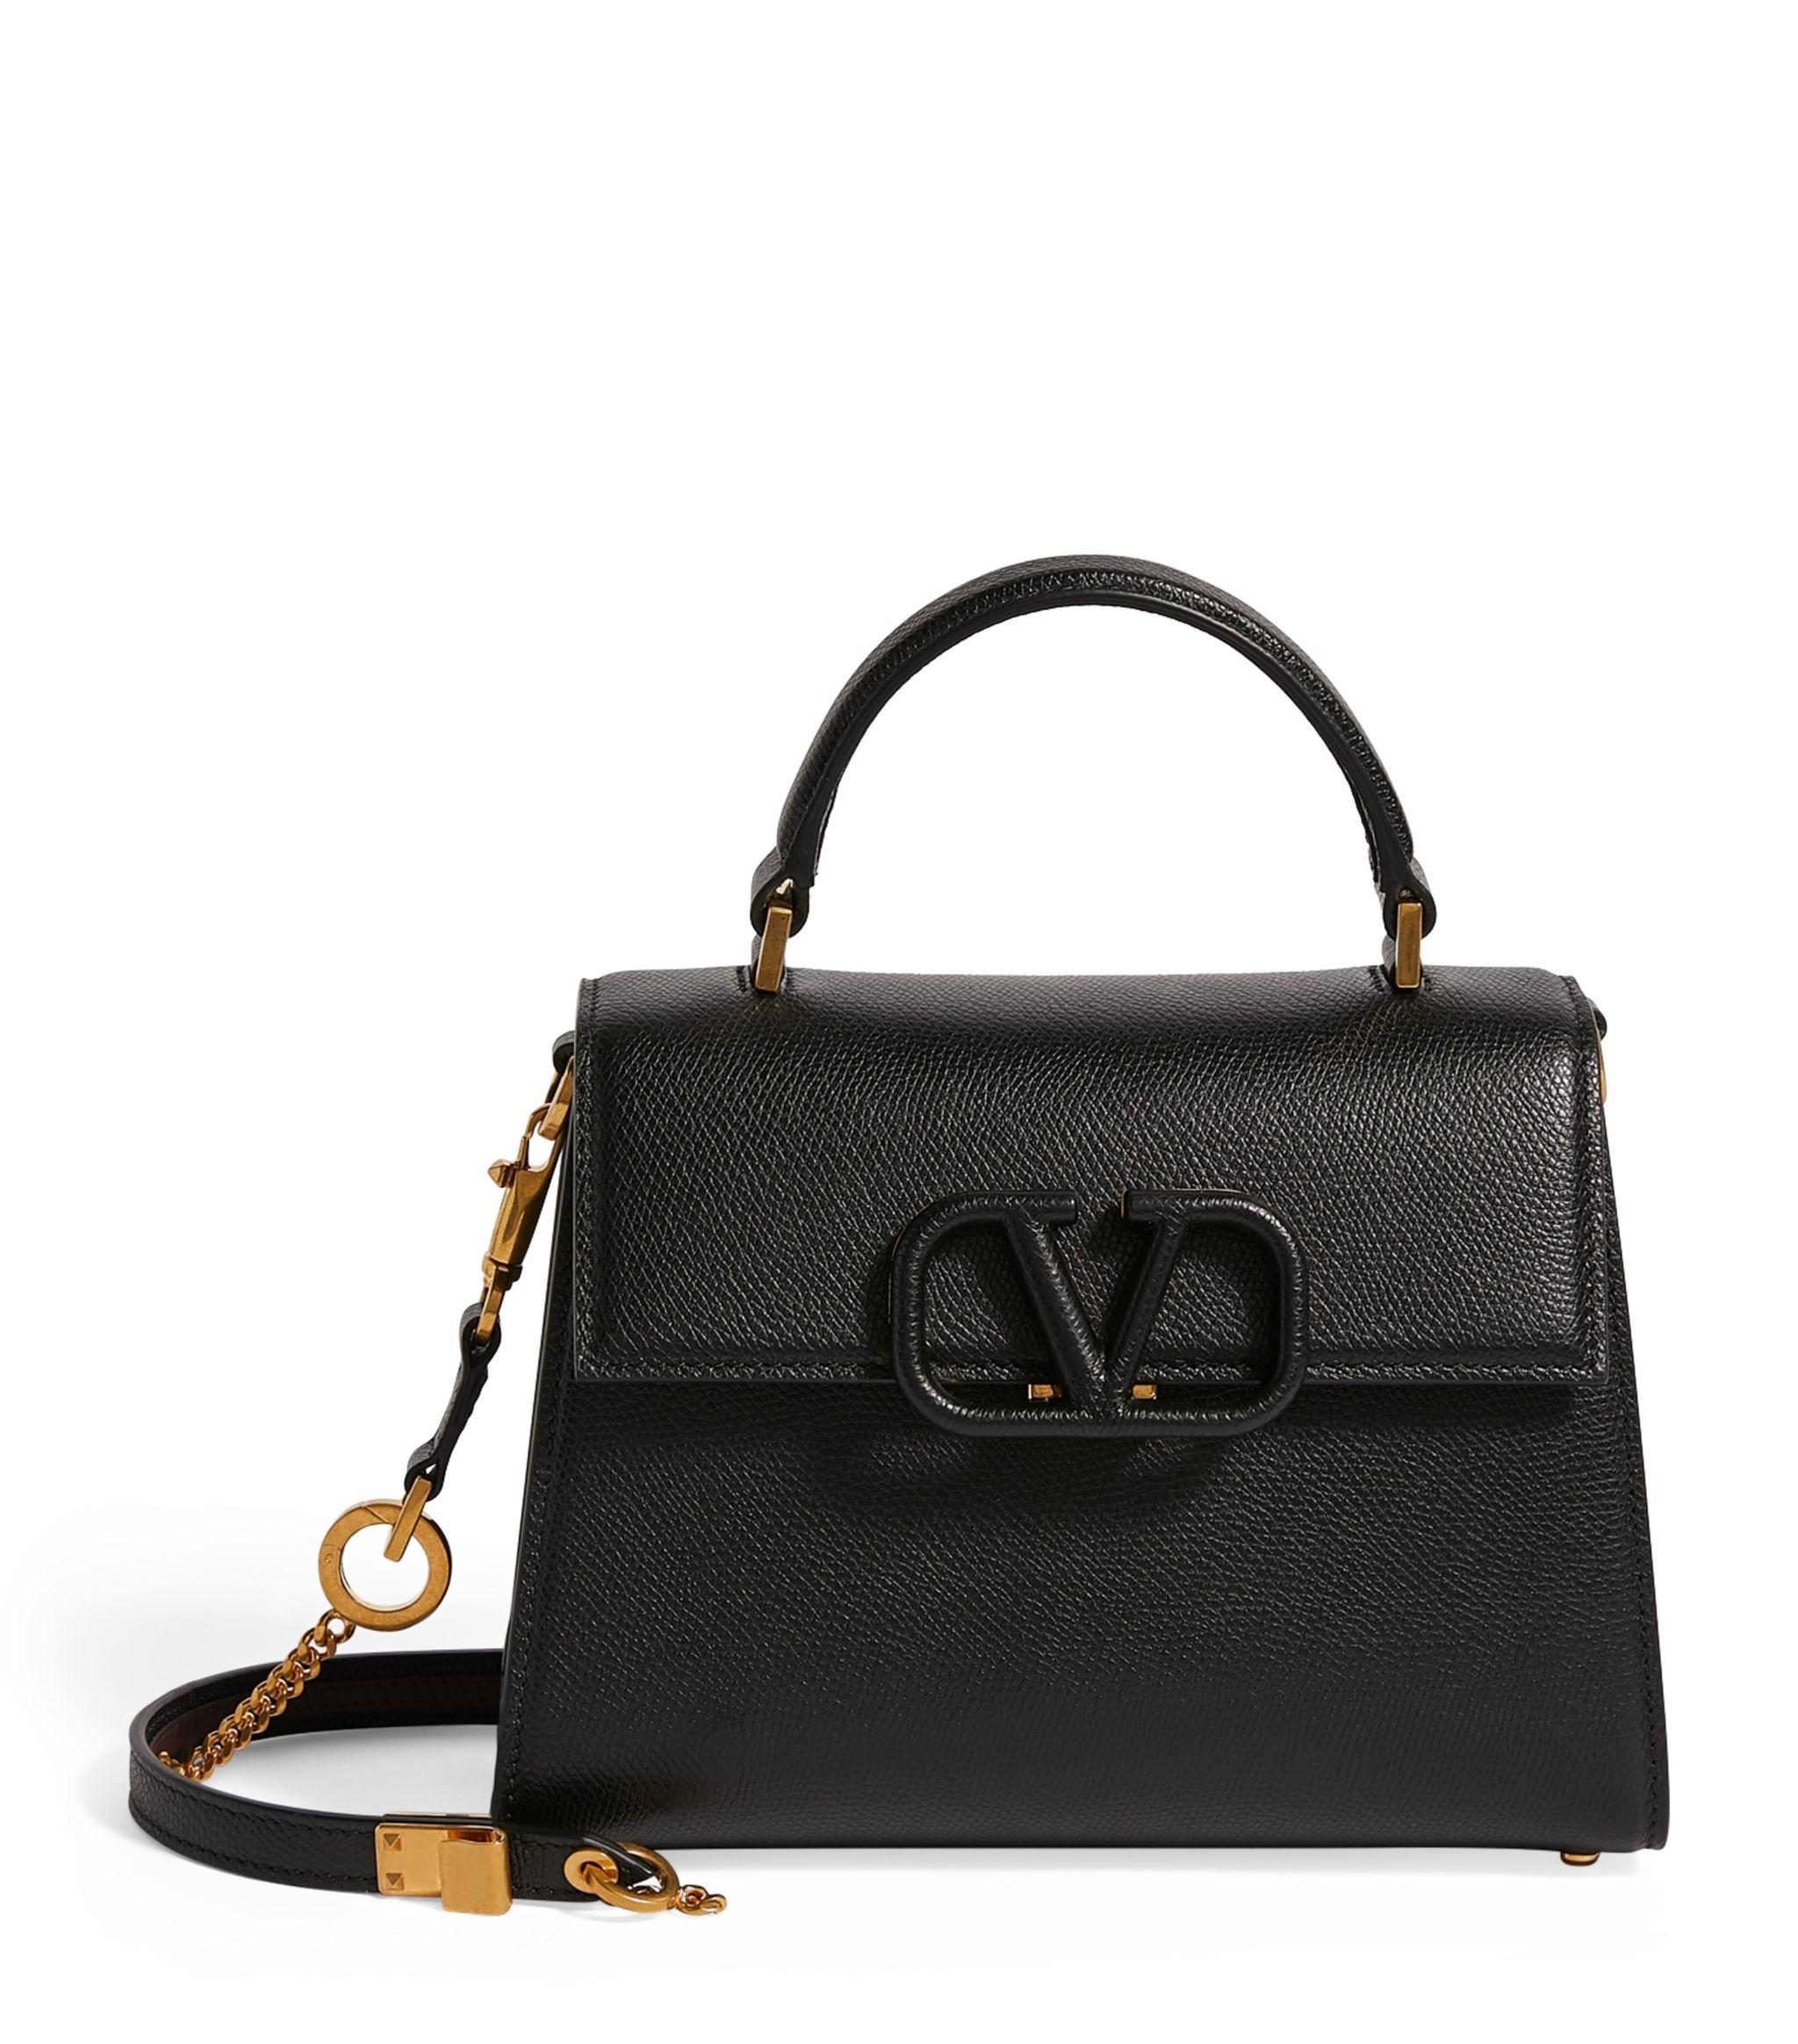 Valentino Small Leather Vsling Top-handle Bag in Black - Save 6% - Lyst